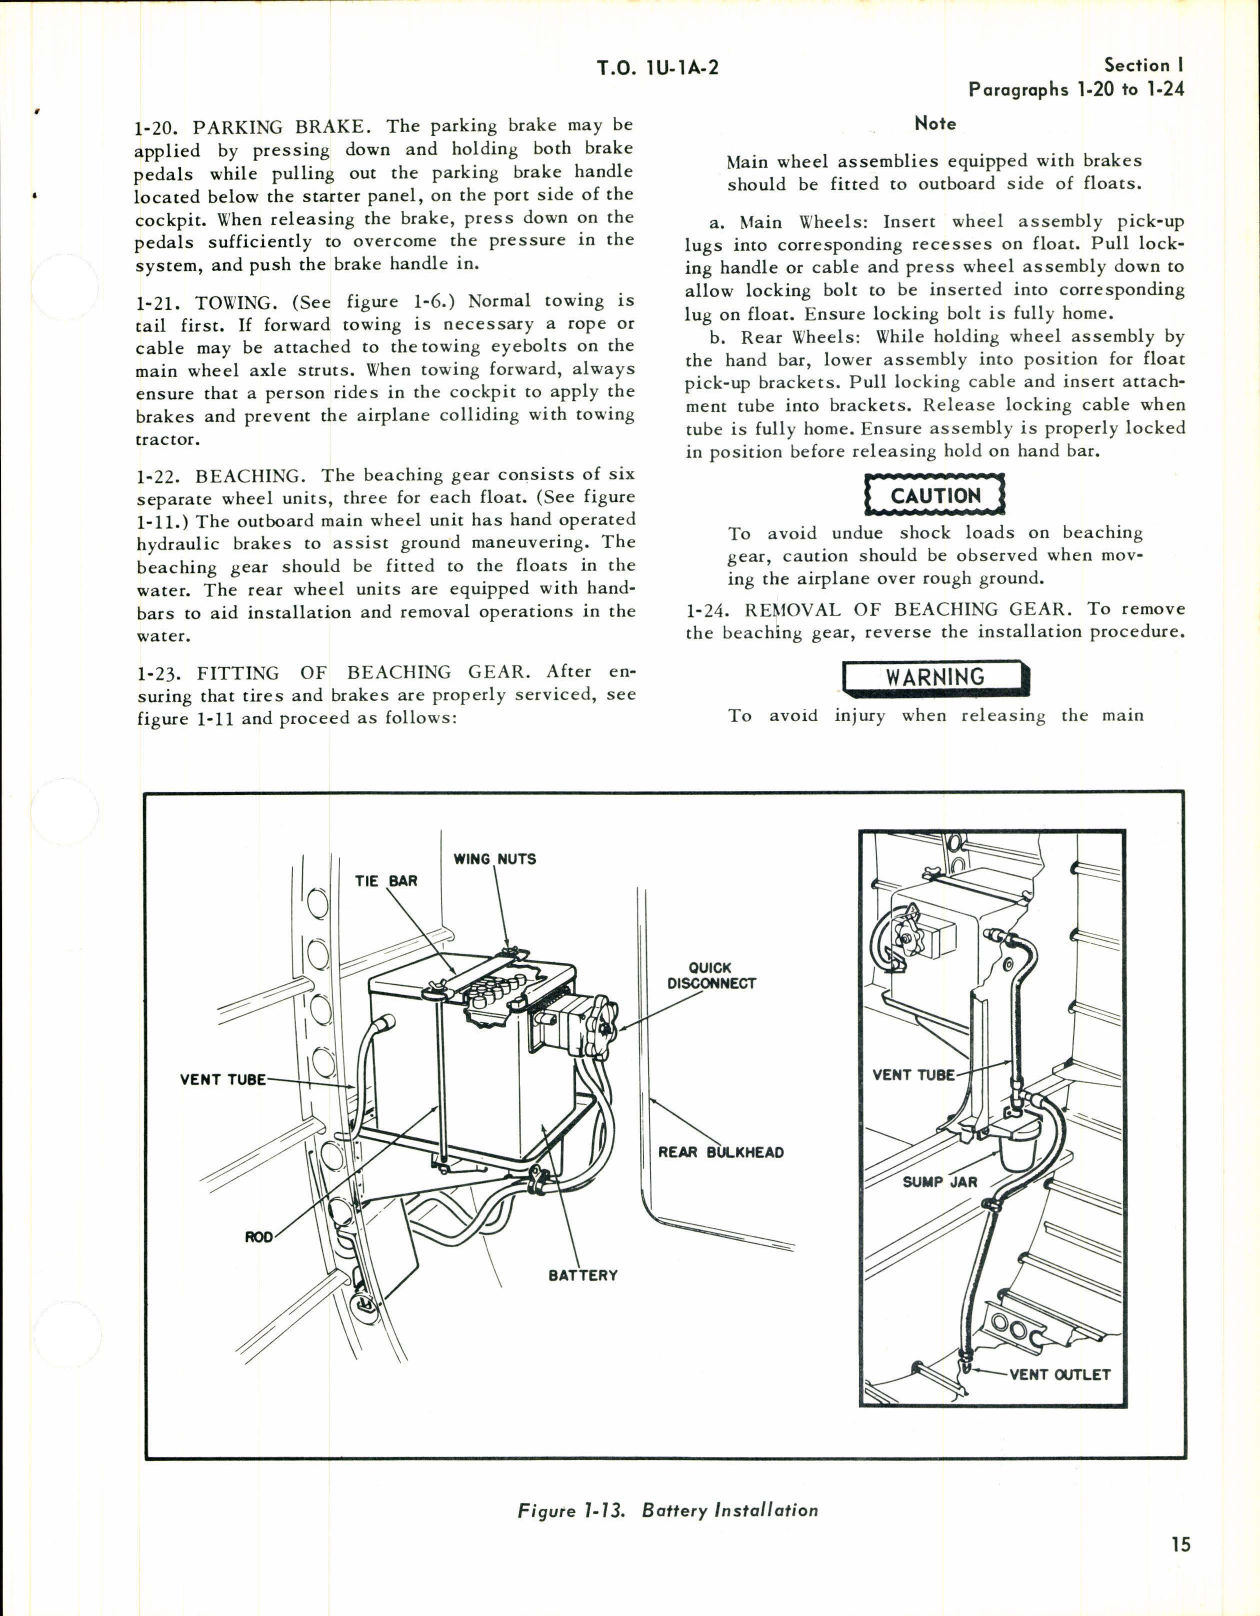 Sample page 7 from AirCorps Library document: Maintenance Instructions for YU-1 and U-1A